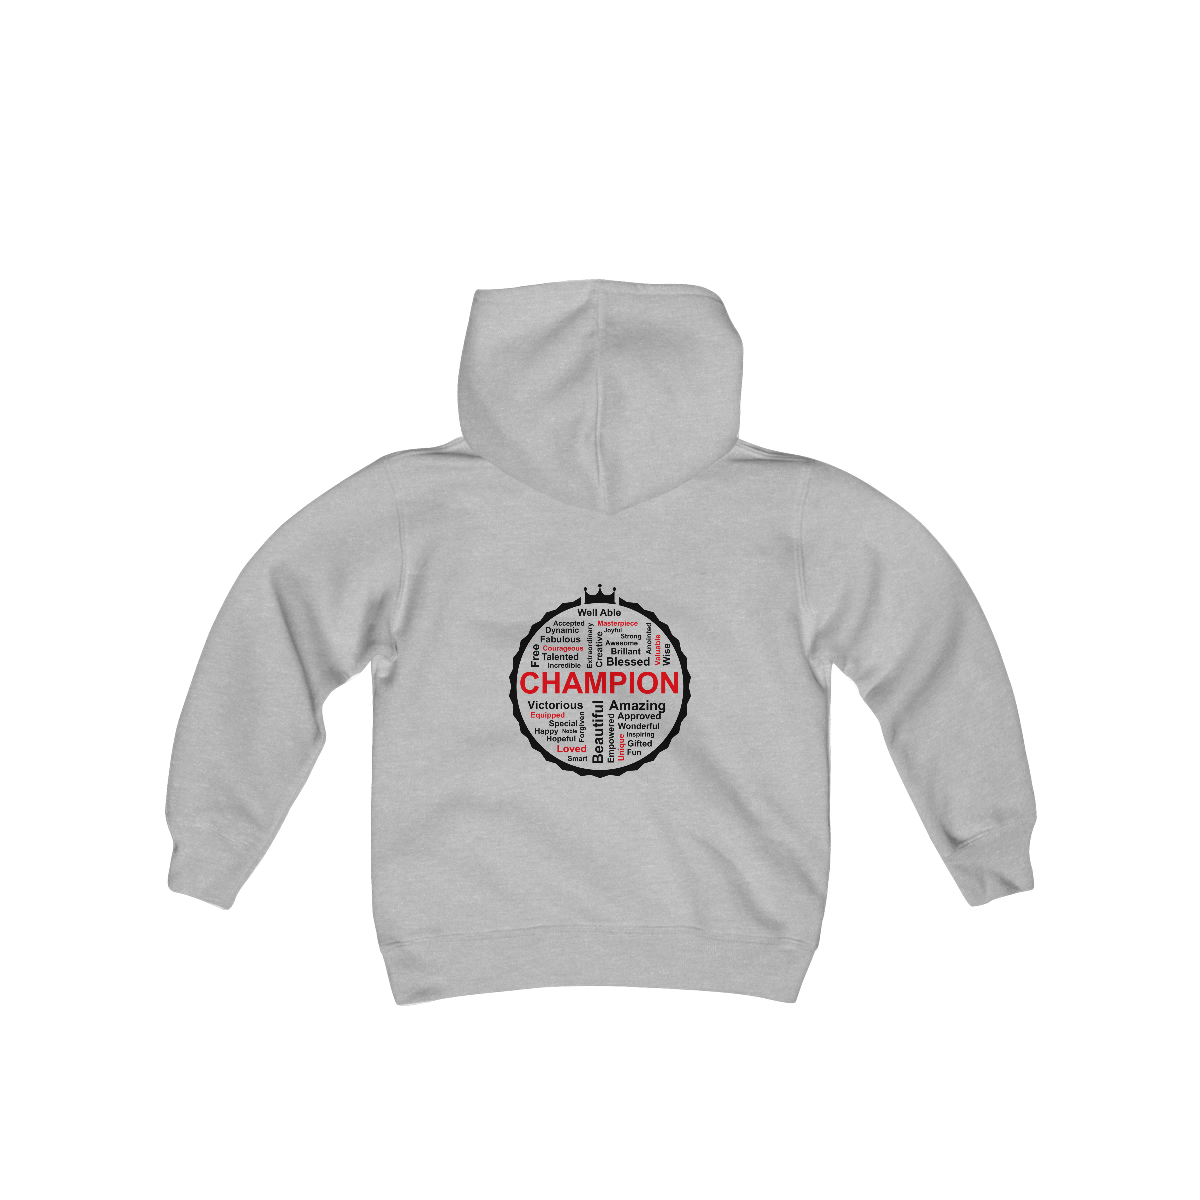 CHAMPION Kids Hoodie - Champions Needs Club Special Ministry